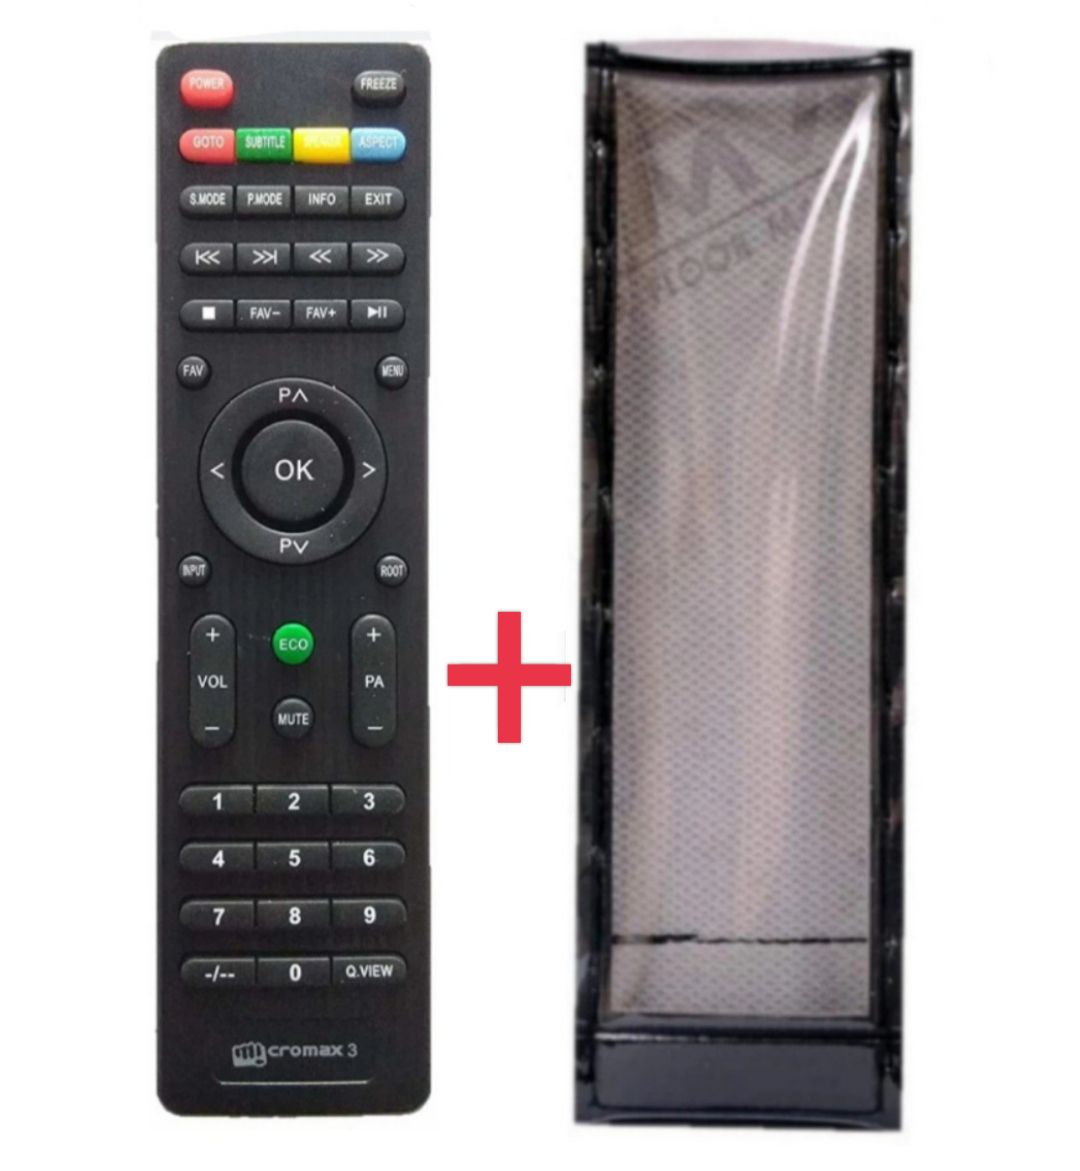     			SUGNESH C-22 New TvR-54  RC TV Remote Compatible with Micromax Smart led/lcd